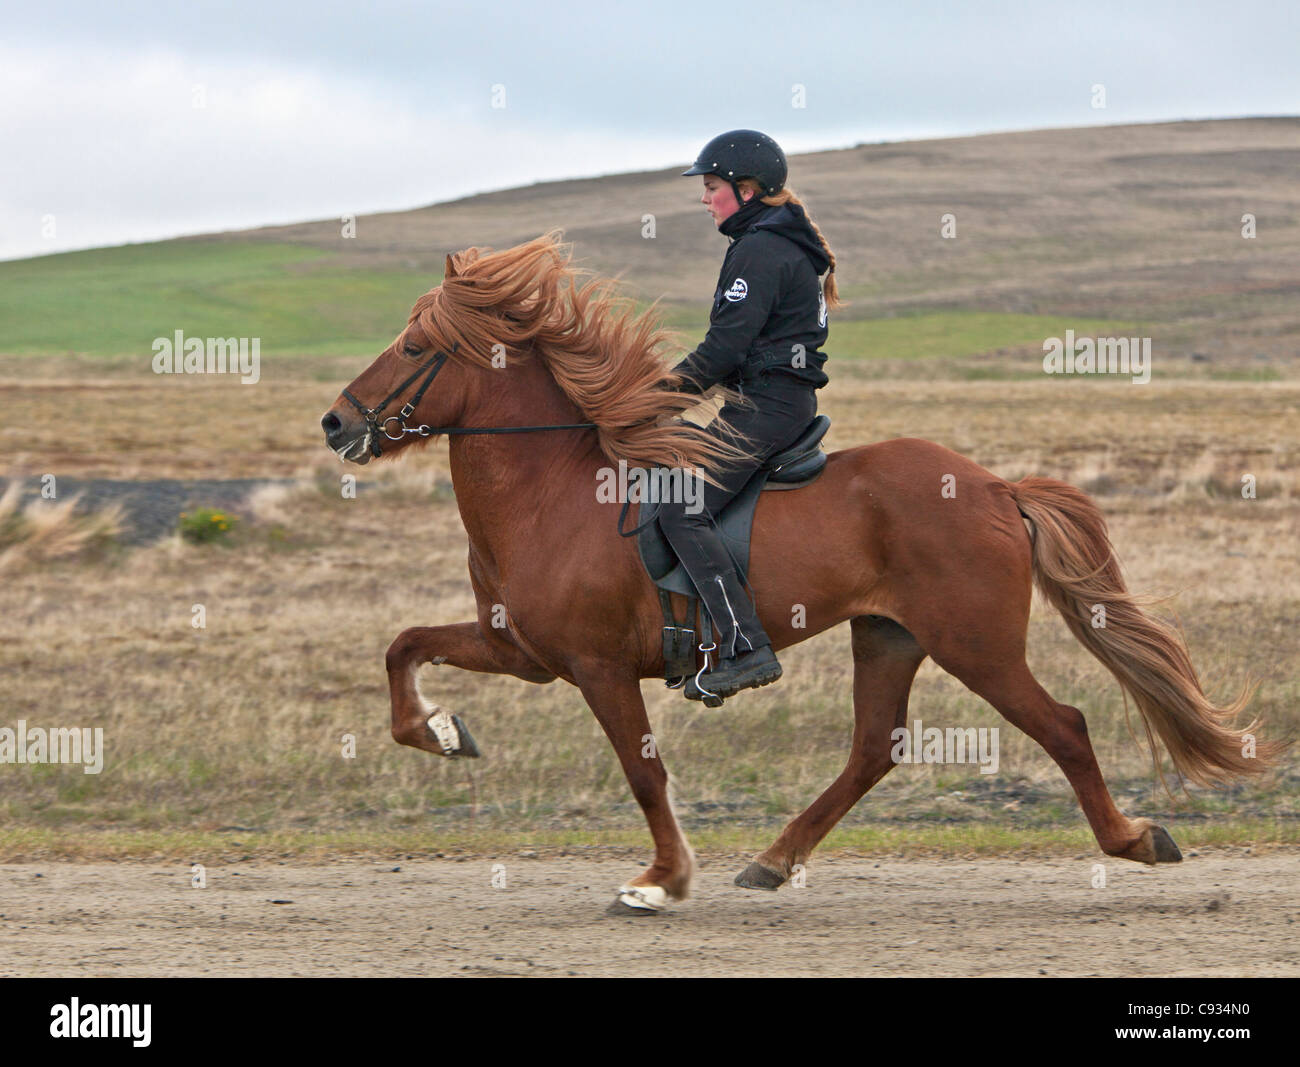 A horsewoman riding her Icelandic horse with the prancing high-step gait called tolt. Stock Photo